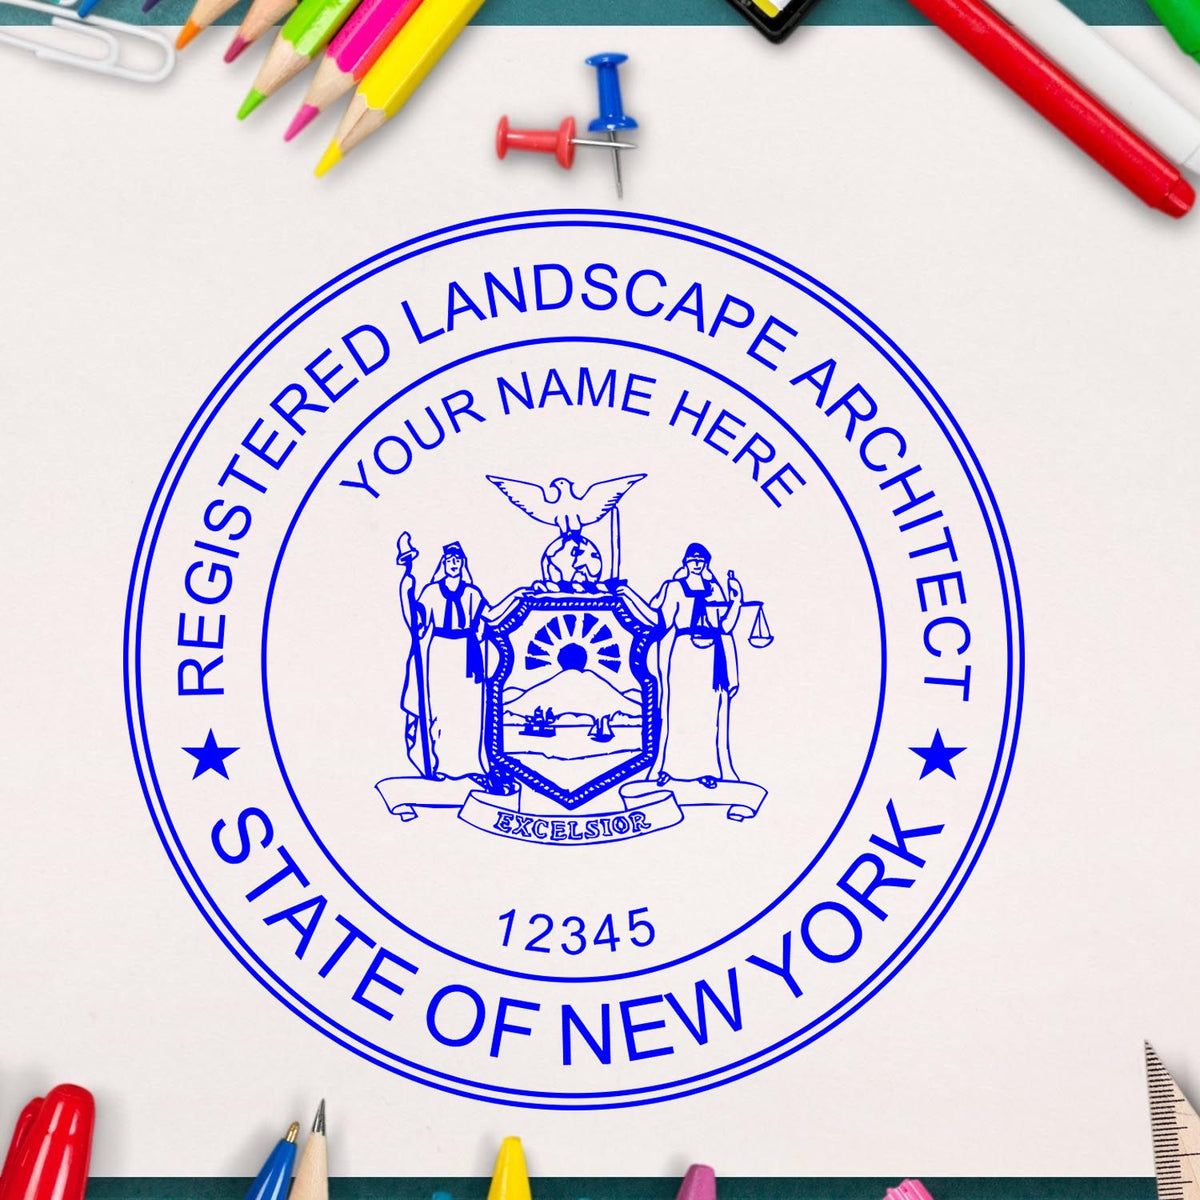 The Premium MaxLight Pre-Inked New York Landscape Architectural Stamp stamp impression comes to life with a crisp, detailed photo on paper - showcasing true professional quality.